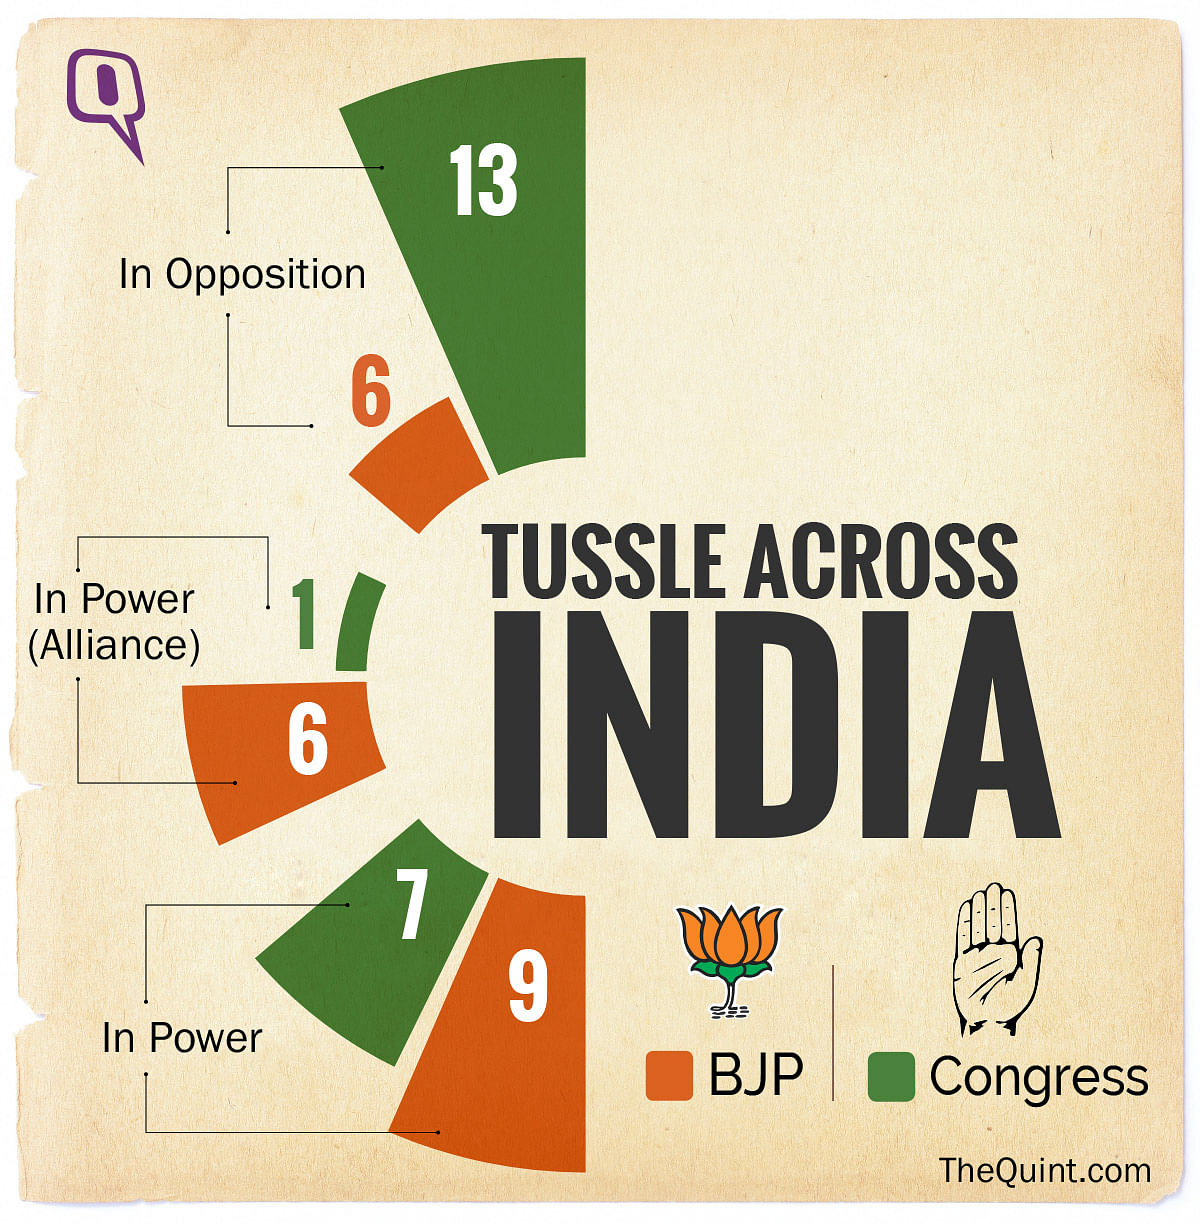 Congress is not yet worn out and will give BJP tough competition in 2019, write Amitabh Tiwari and Subhash Chandra.